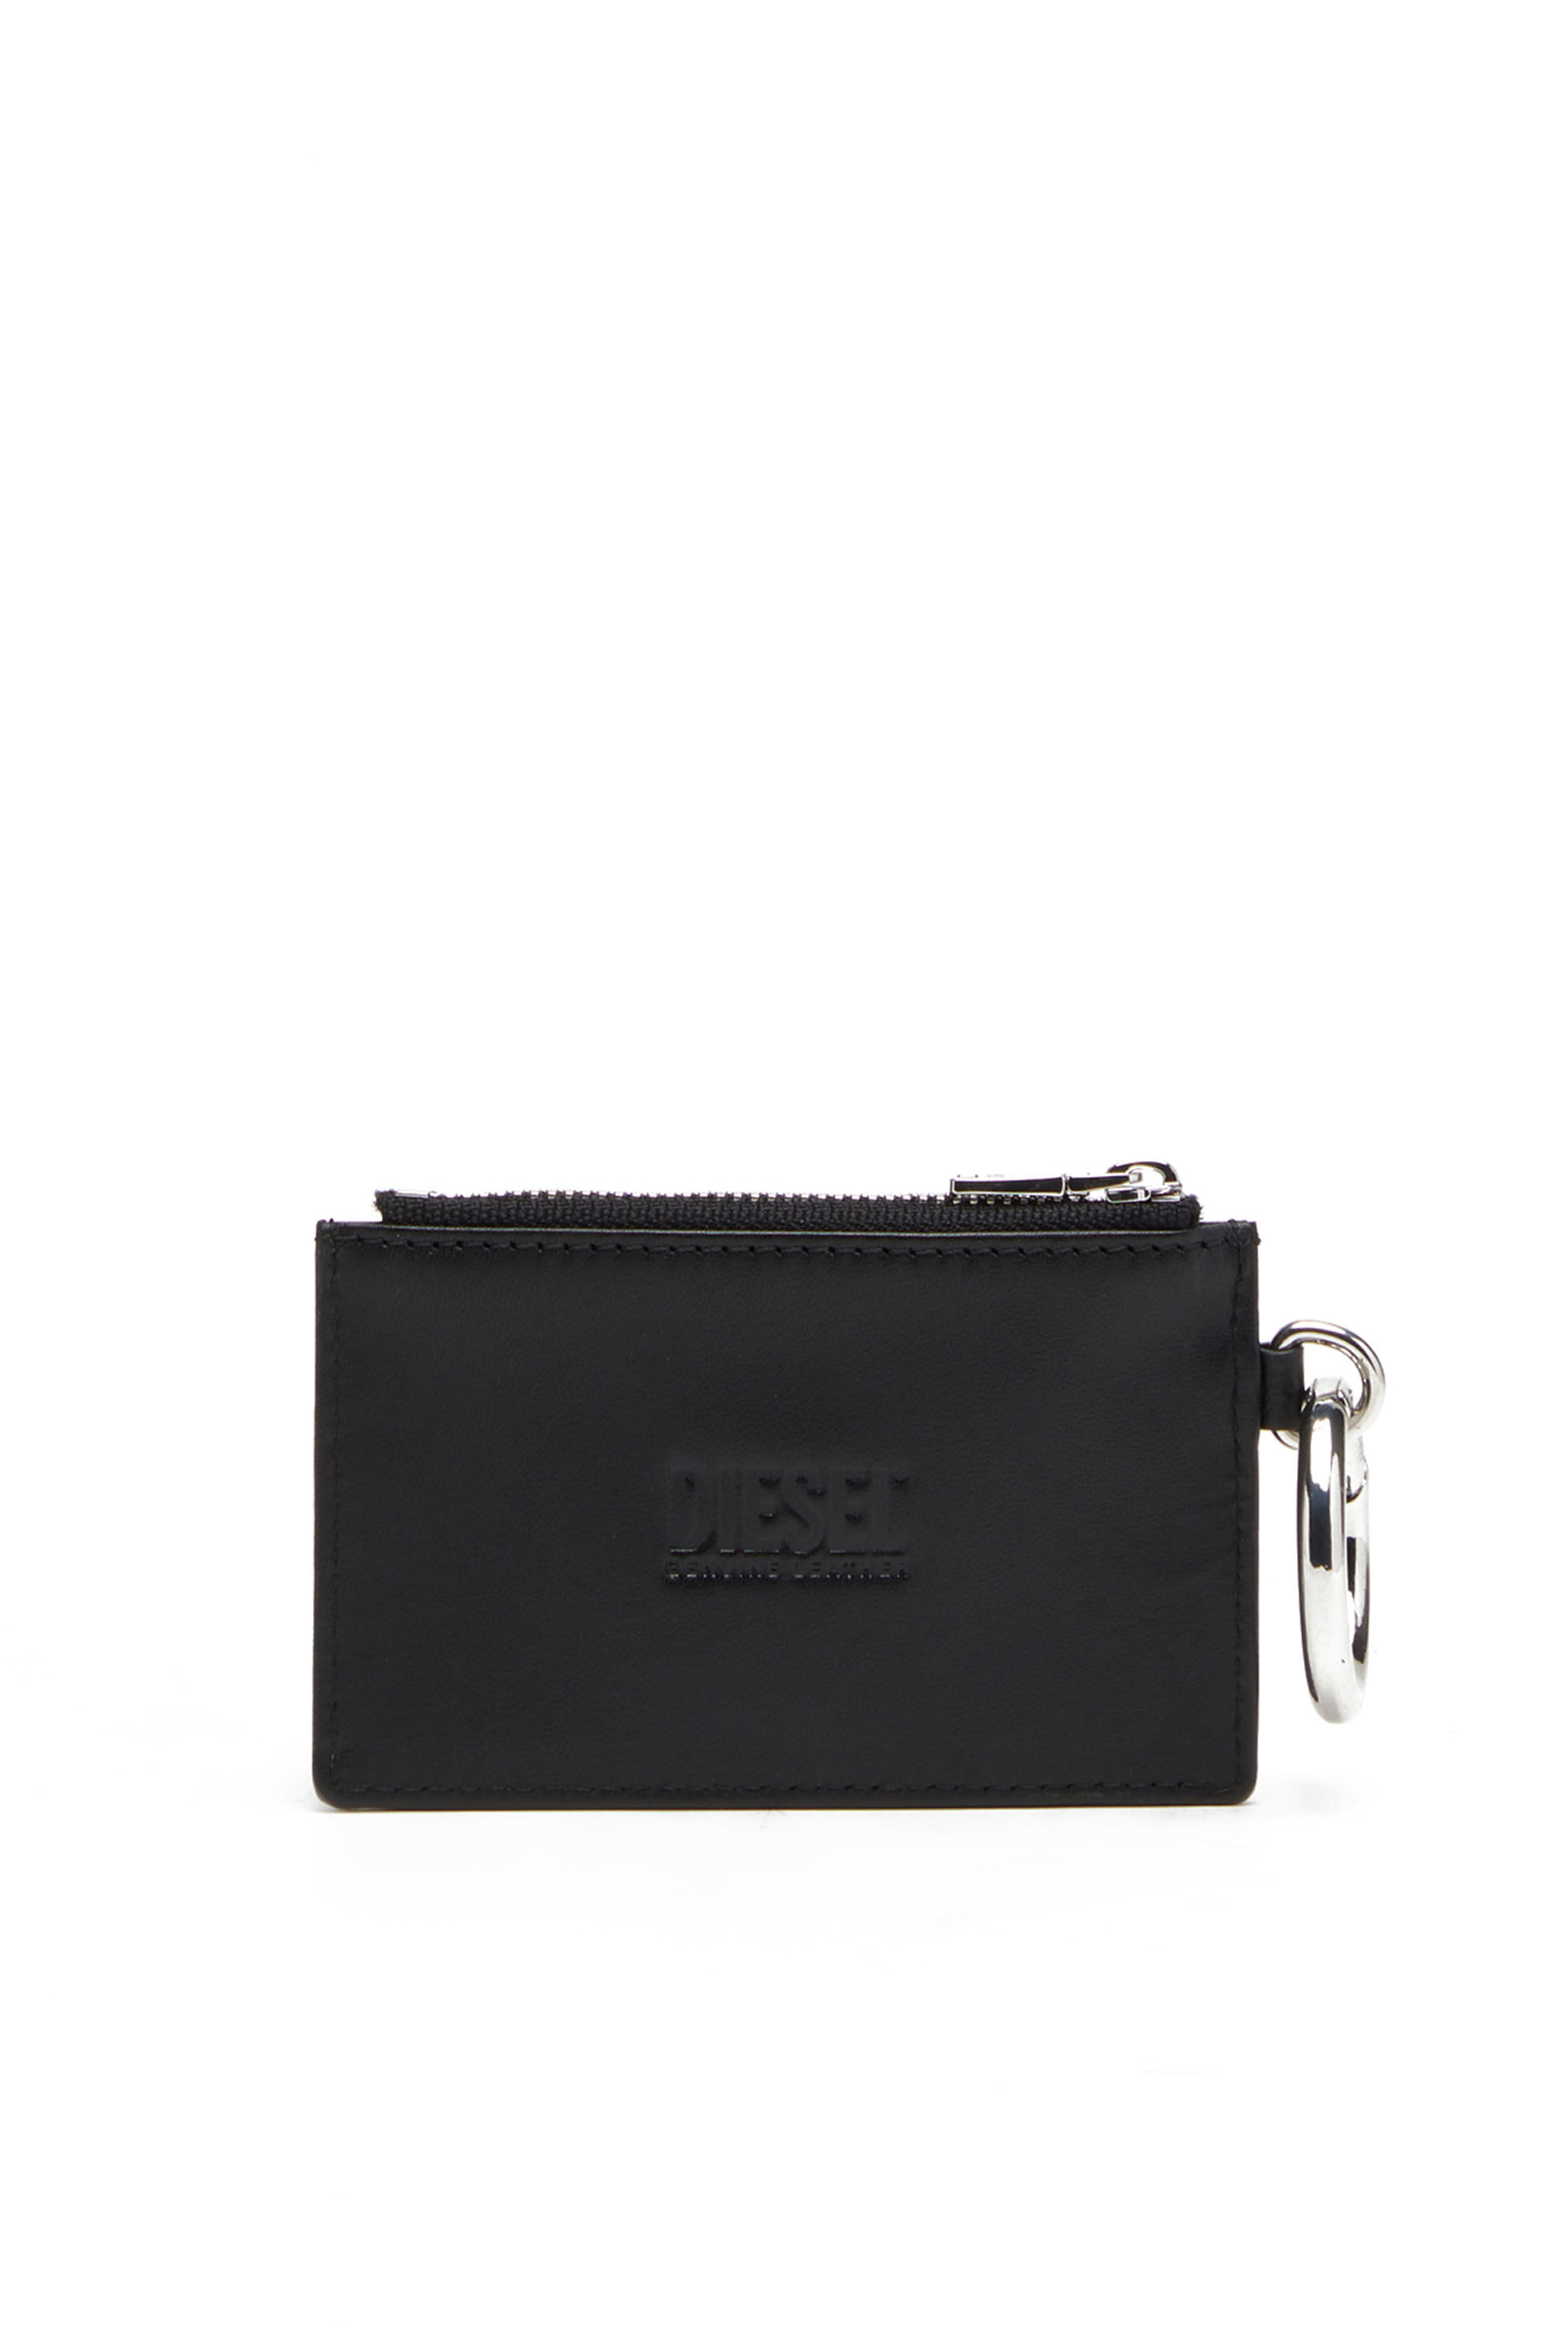 CARD POUCH: Slim leather coin and card holder | Diesel